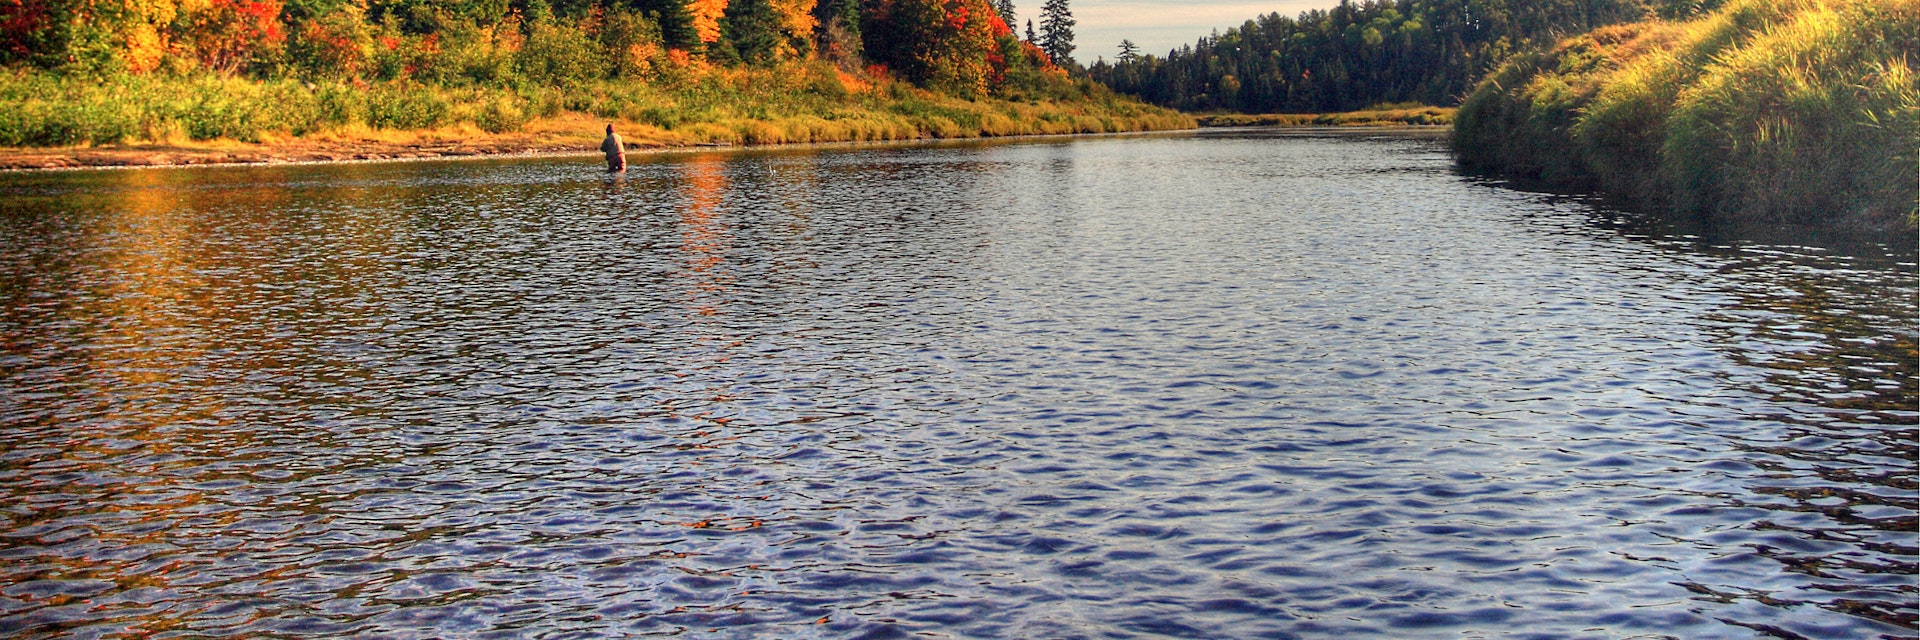 Cains River in New Brunswick, Canada